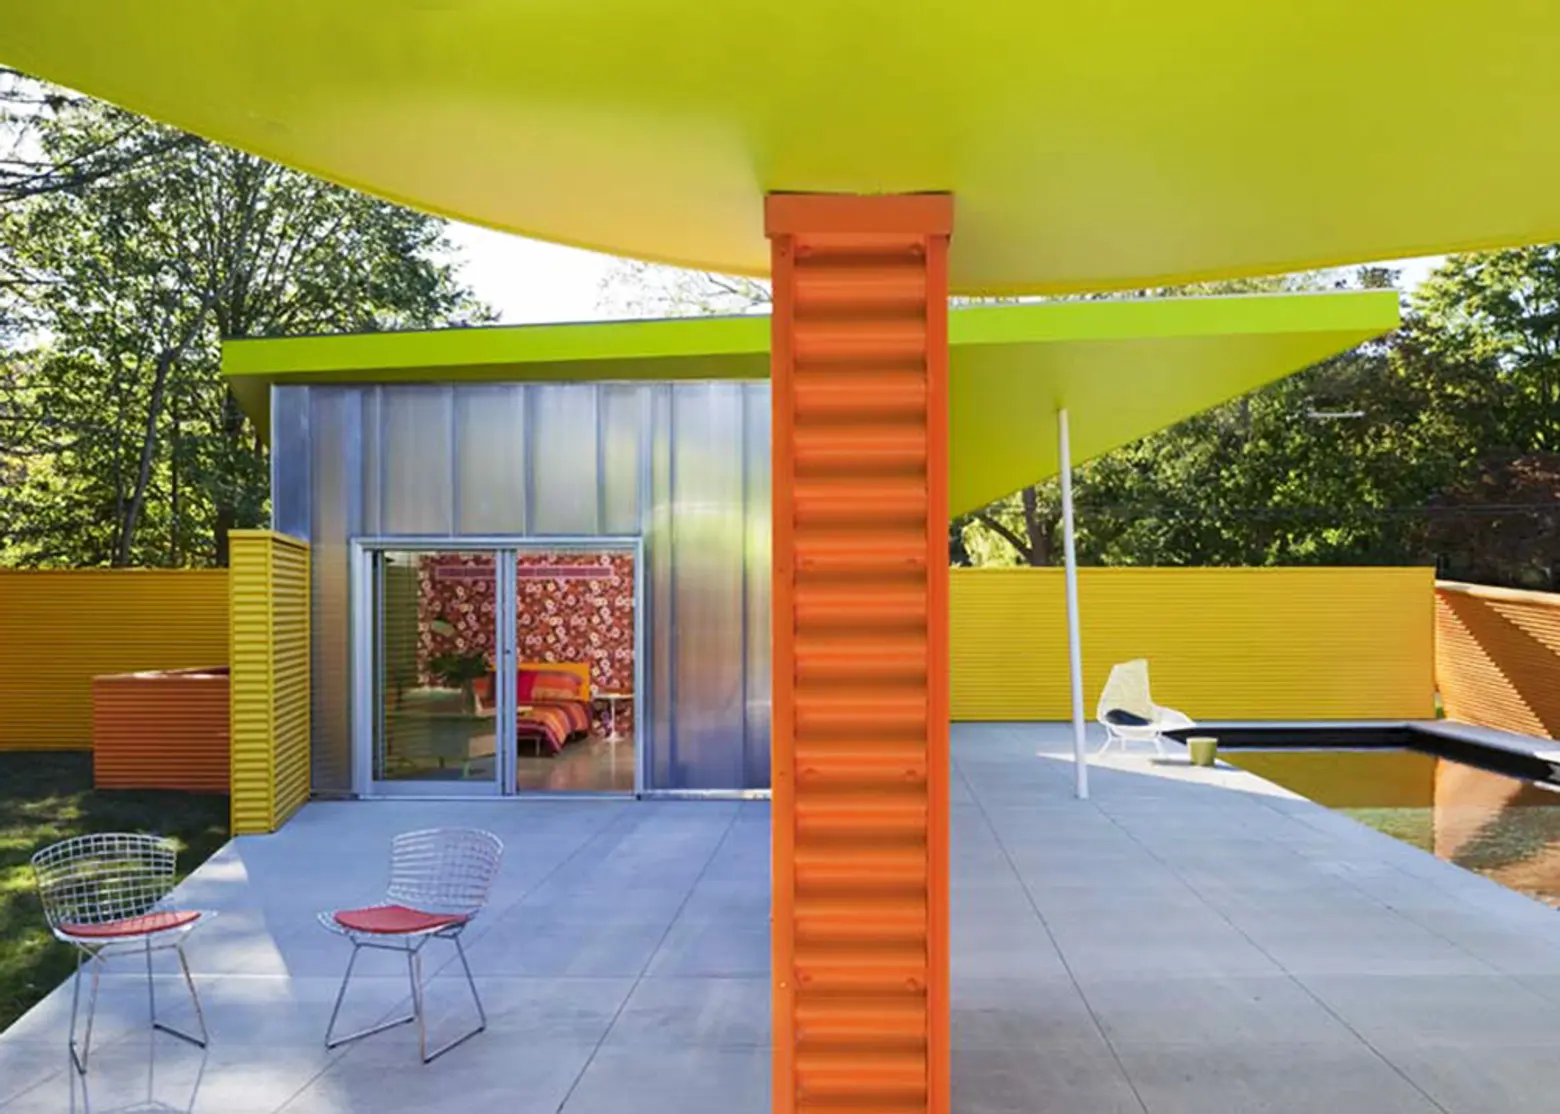 colorful home, Shelter Island Pavilion, Mies van der Rohe’s Barcelona Pavilion, Stamberg Aferiat, polycarbonate walls, passive house, geothermal energy, Shelter Island